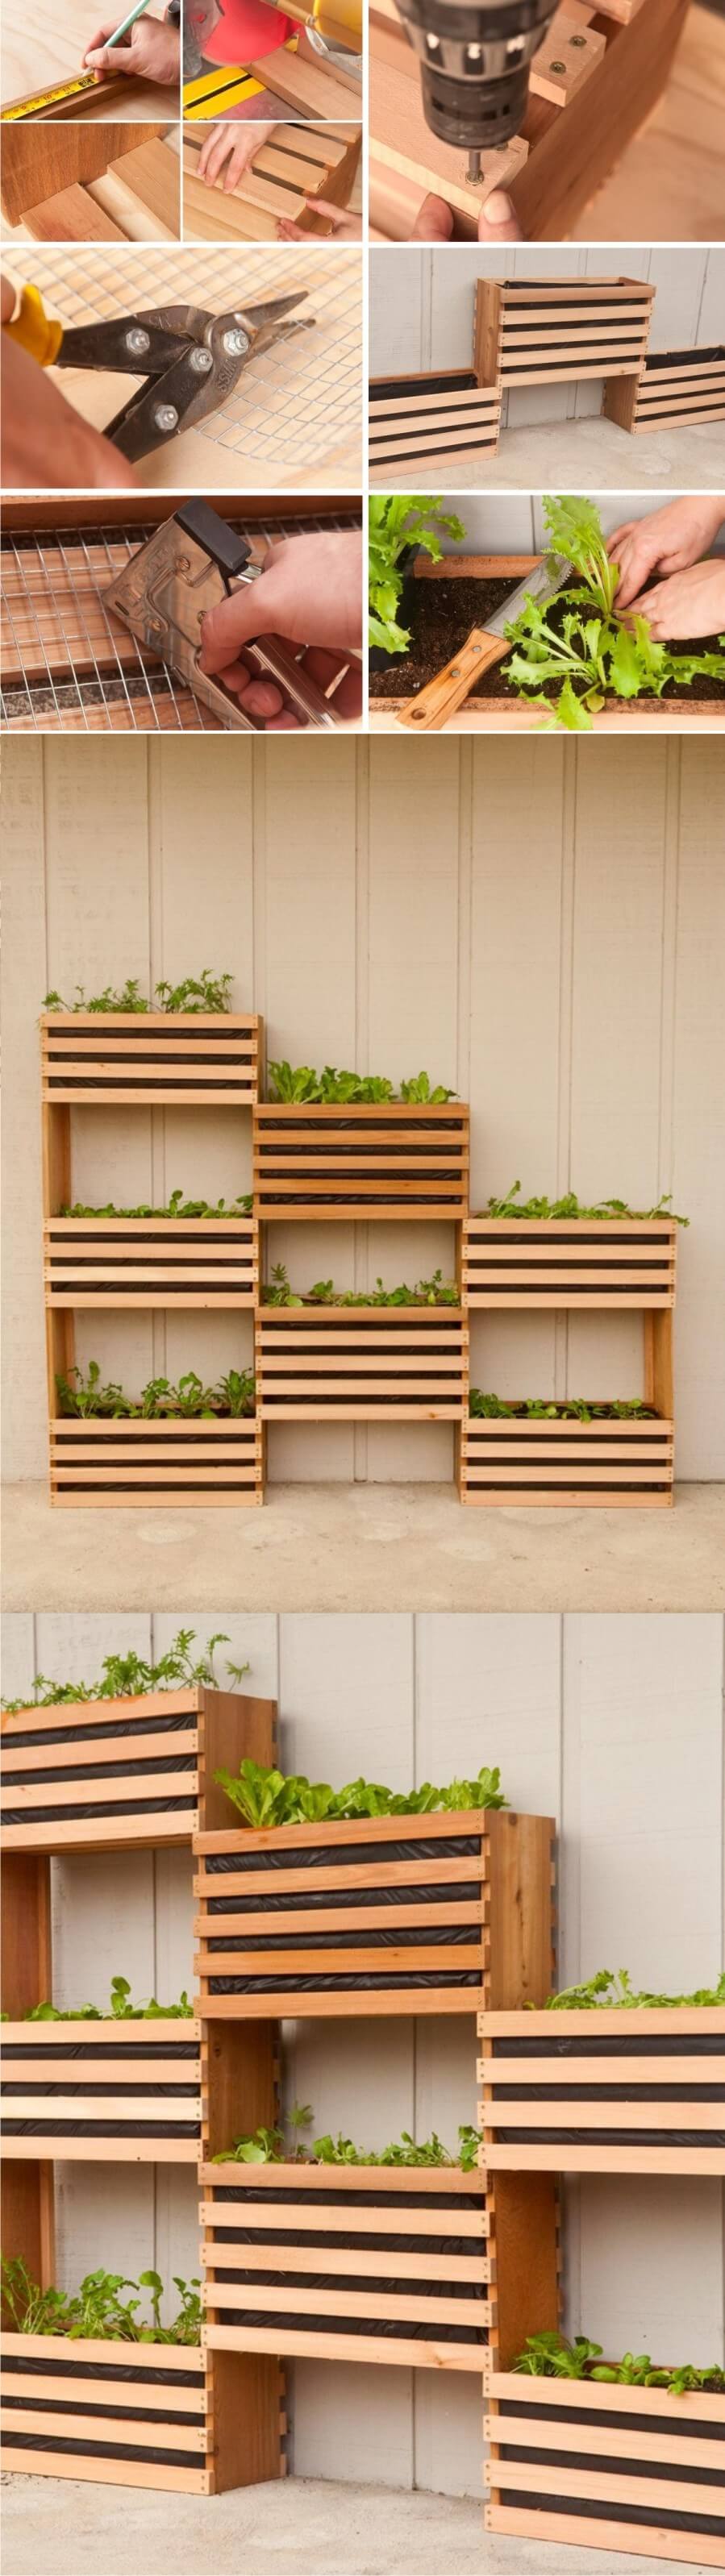 Wood Pallet Mounted Planter Boxes